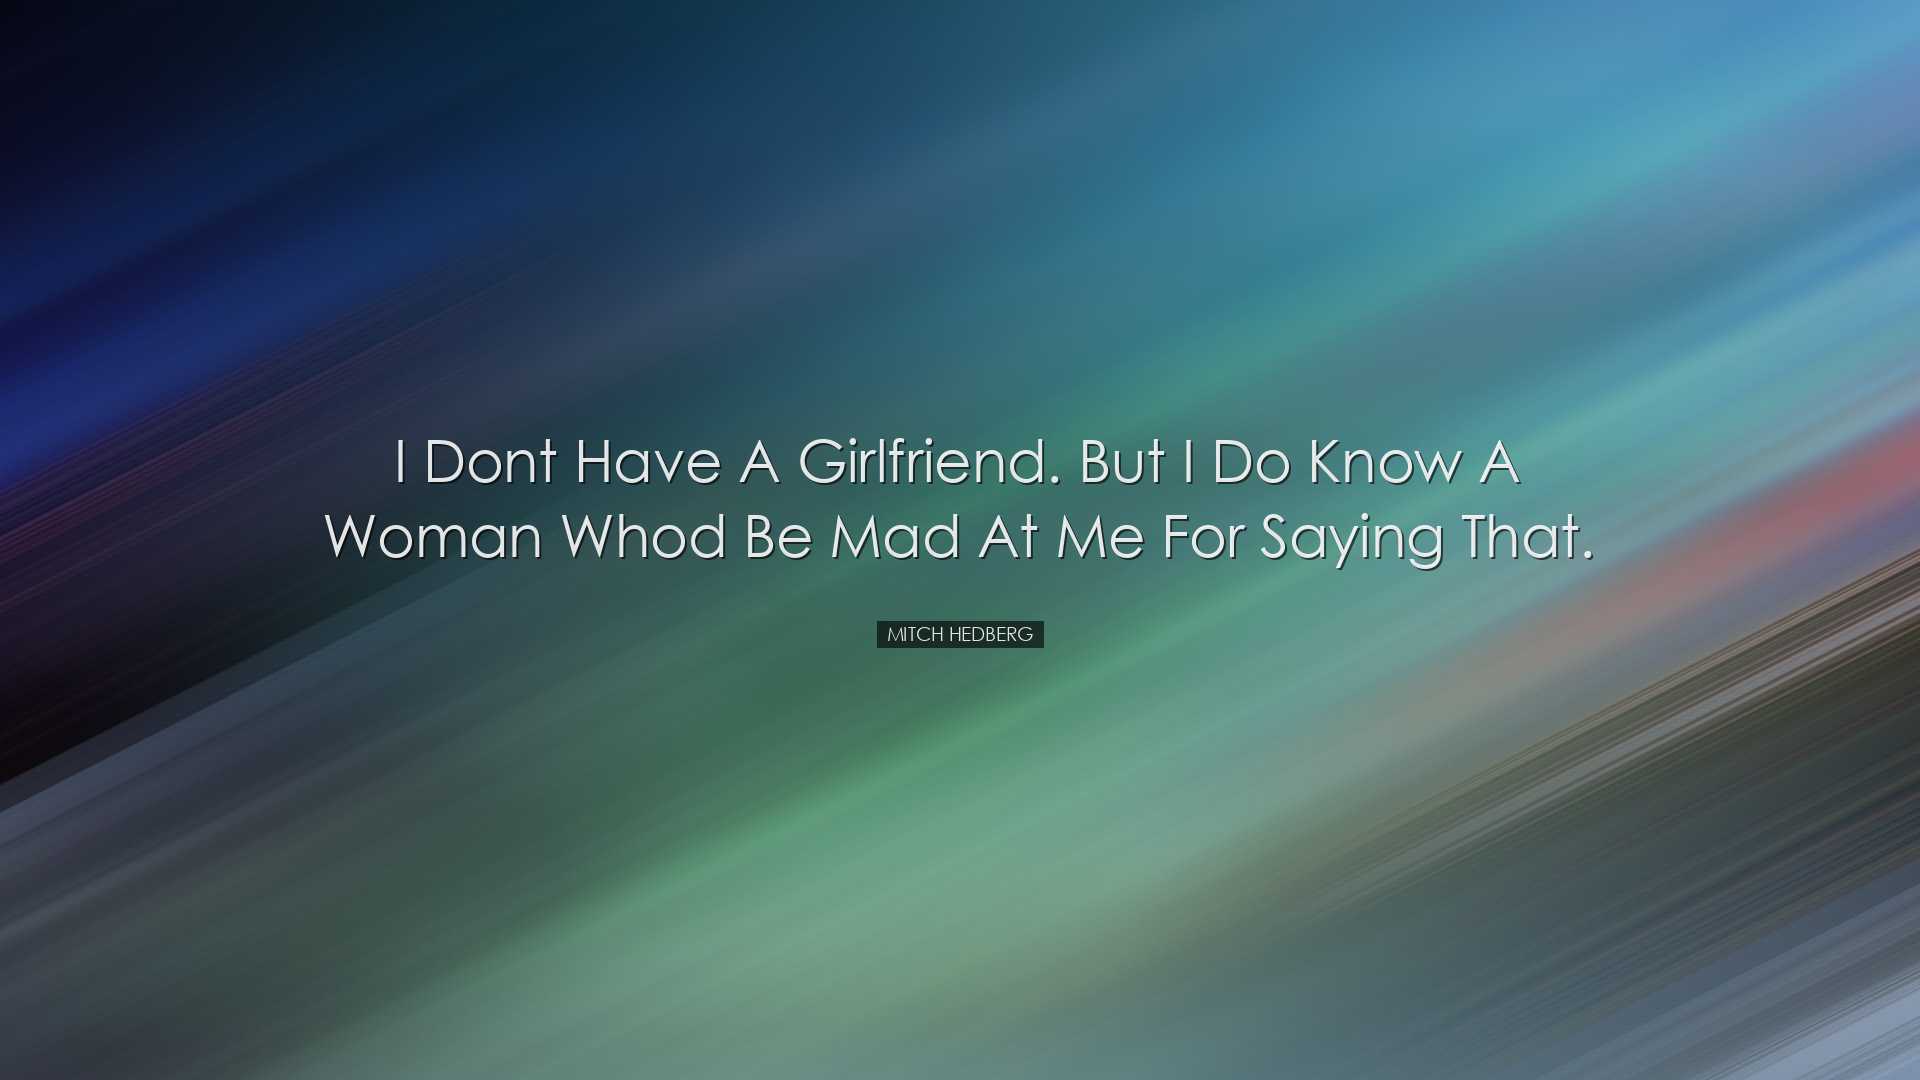 I dont have a girlfriend. But I do know a woman whod be mad at me